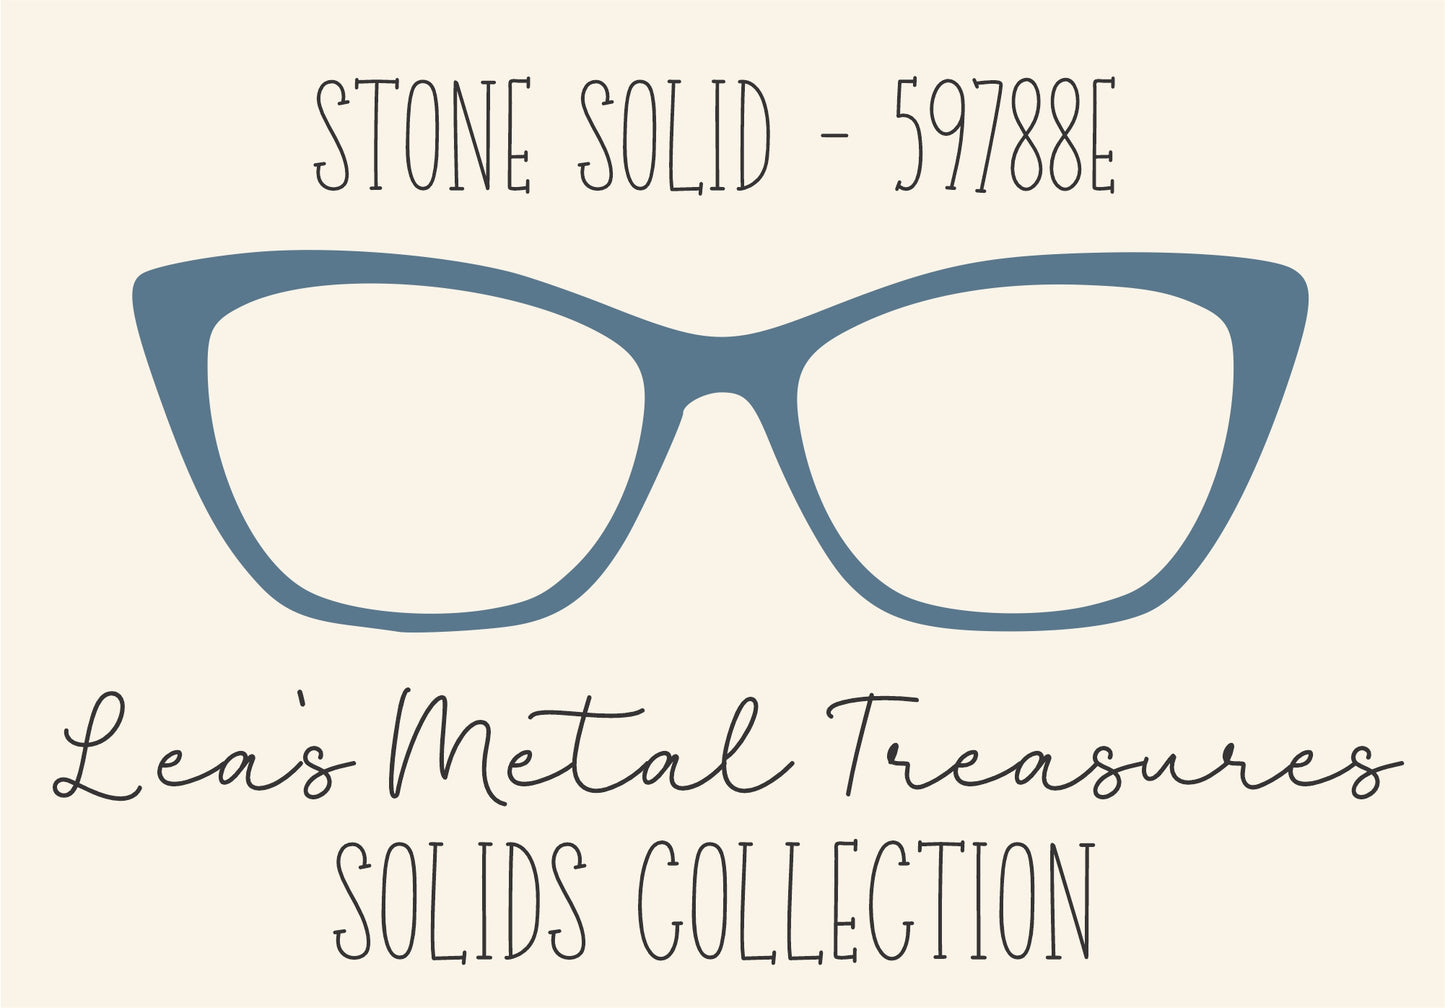 STONE SOLID 59788E Eyewear Frame Toppers COMES WITH MAGNETS